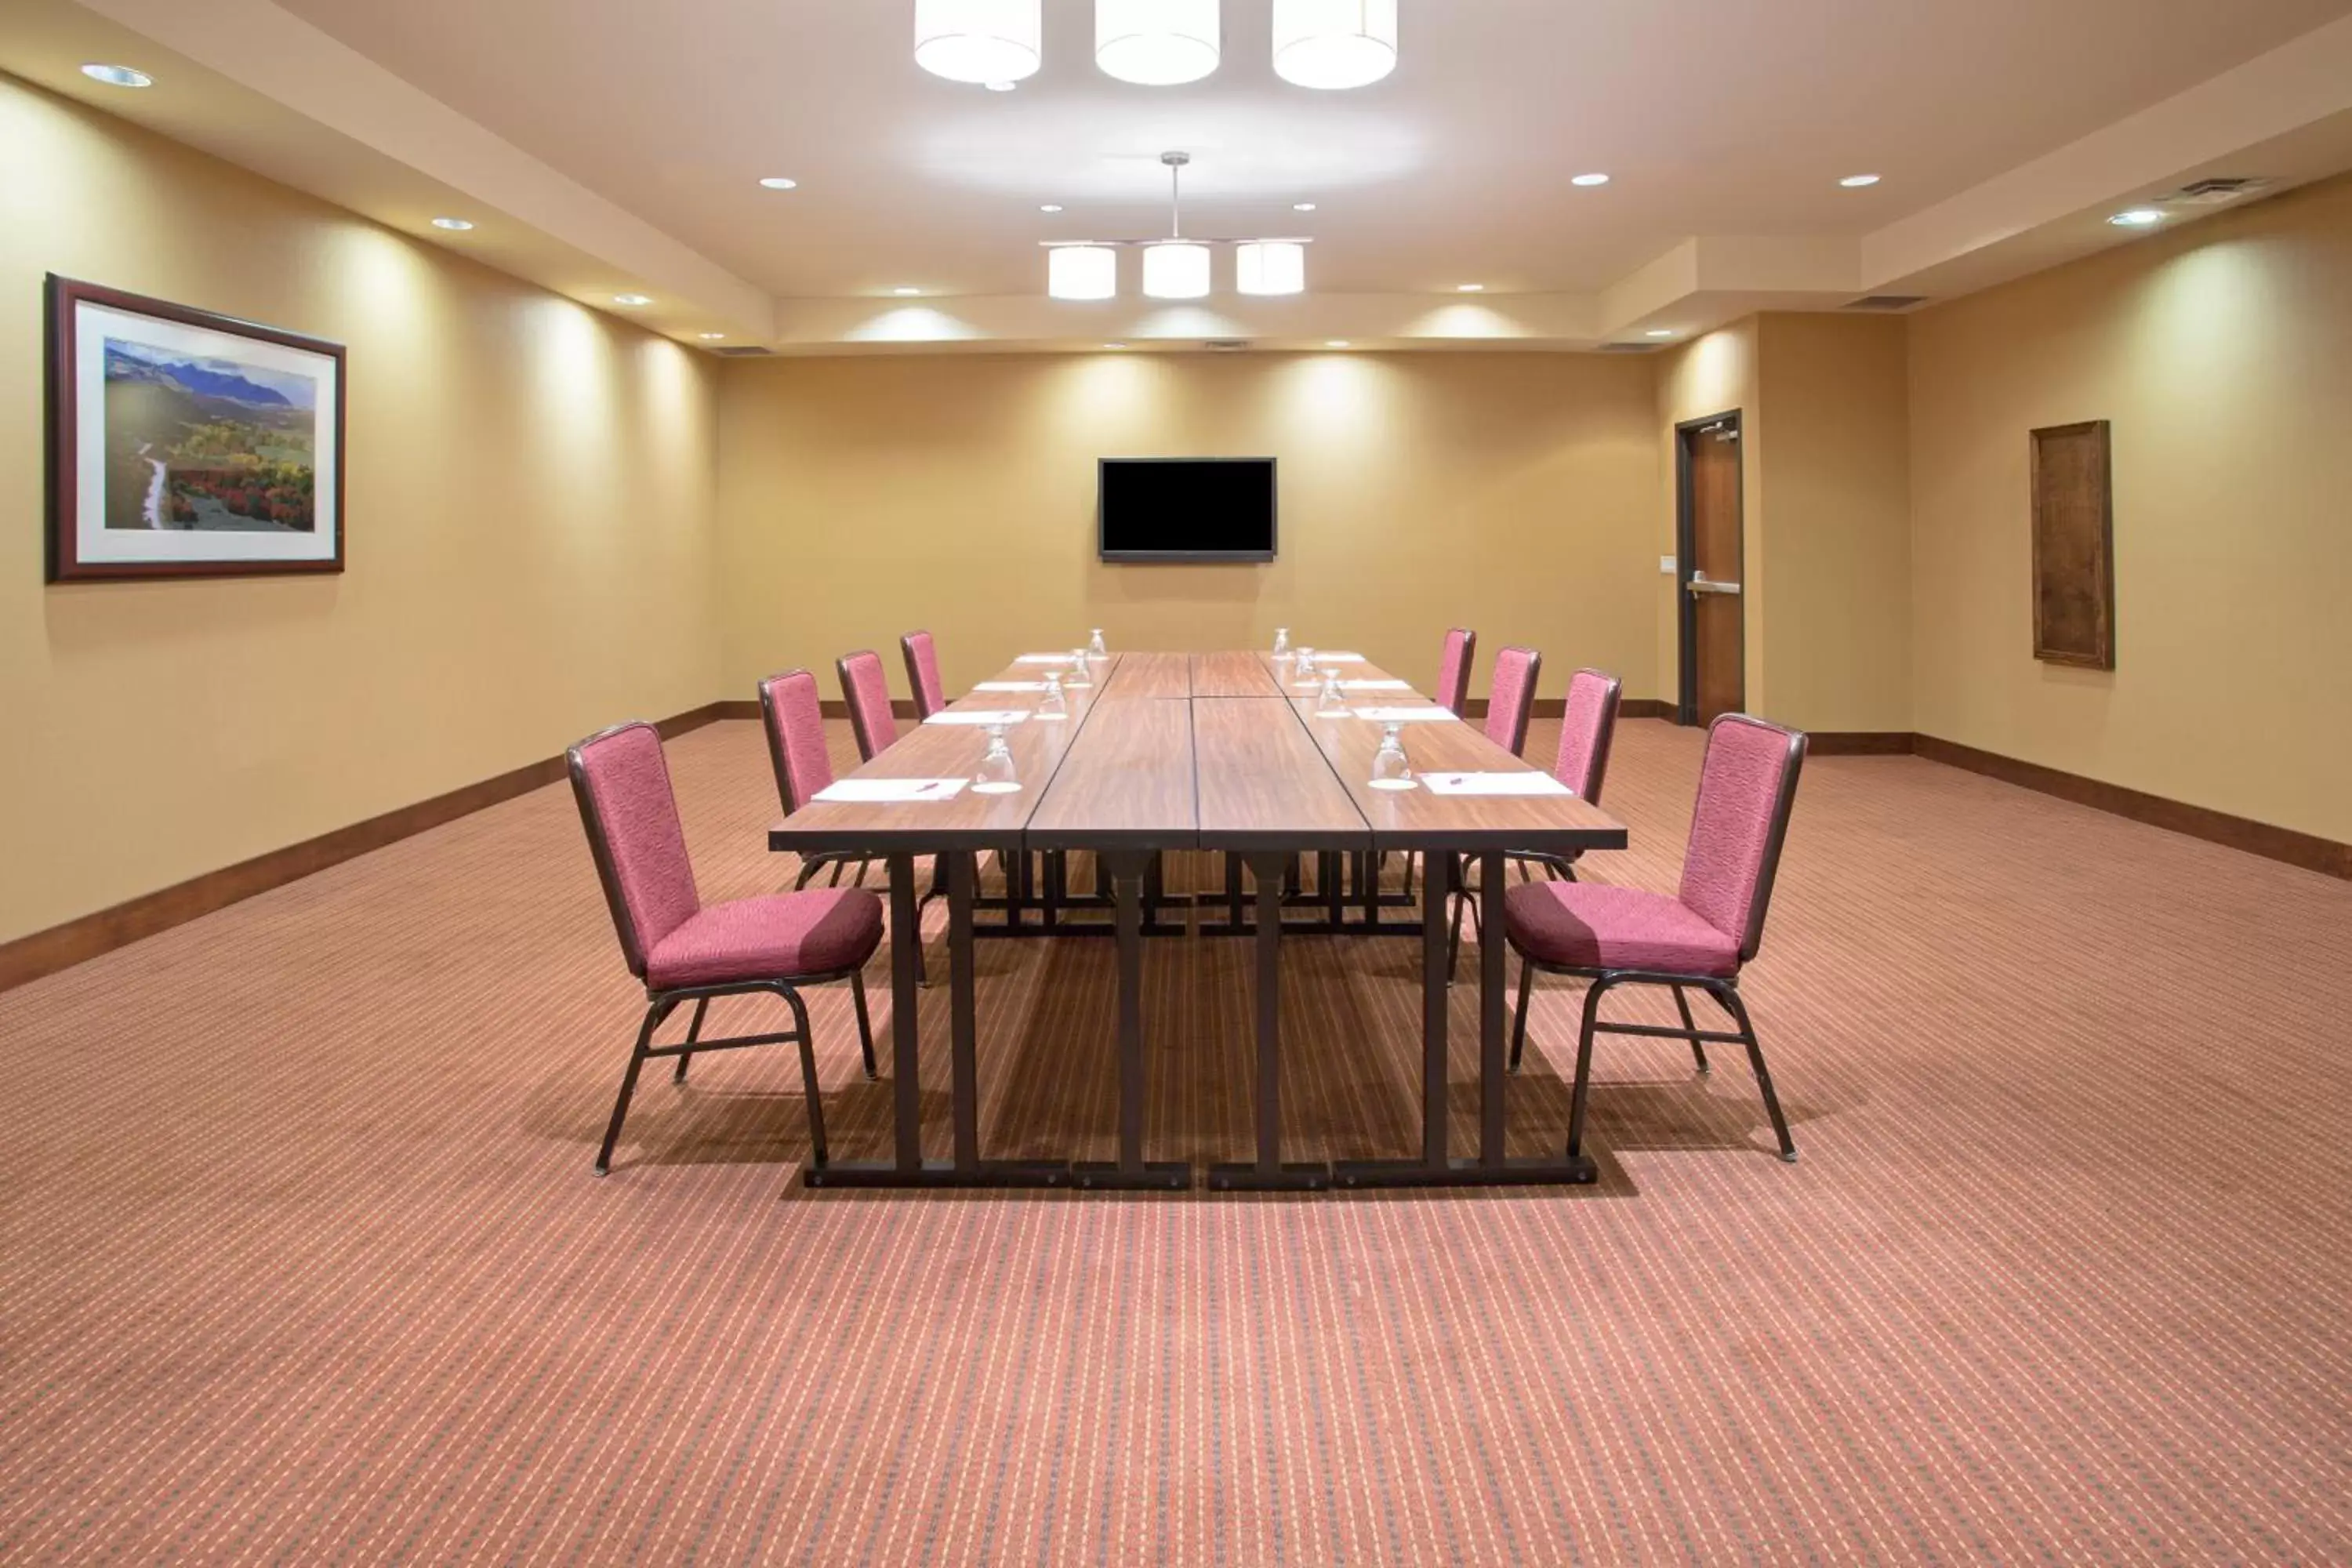 Meeting/conference room in Crowne Plaza Denver International Airport, an IHG Hotel